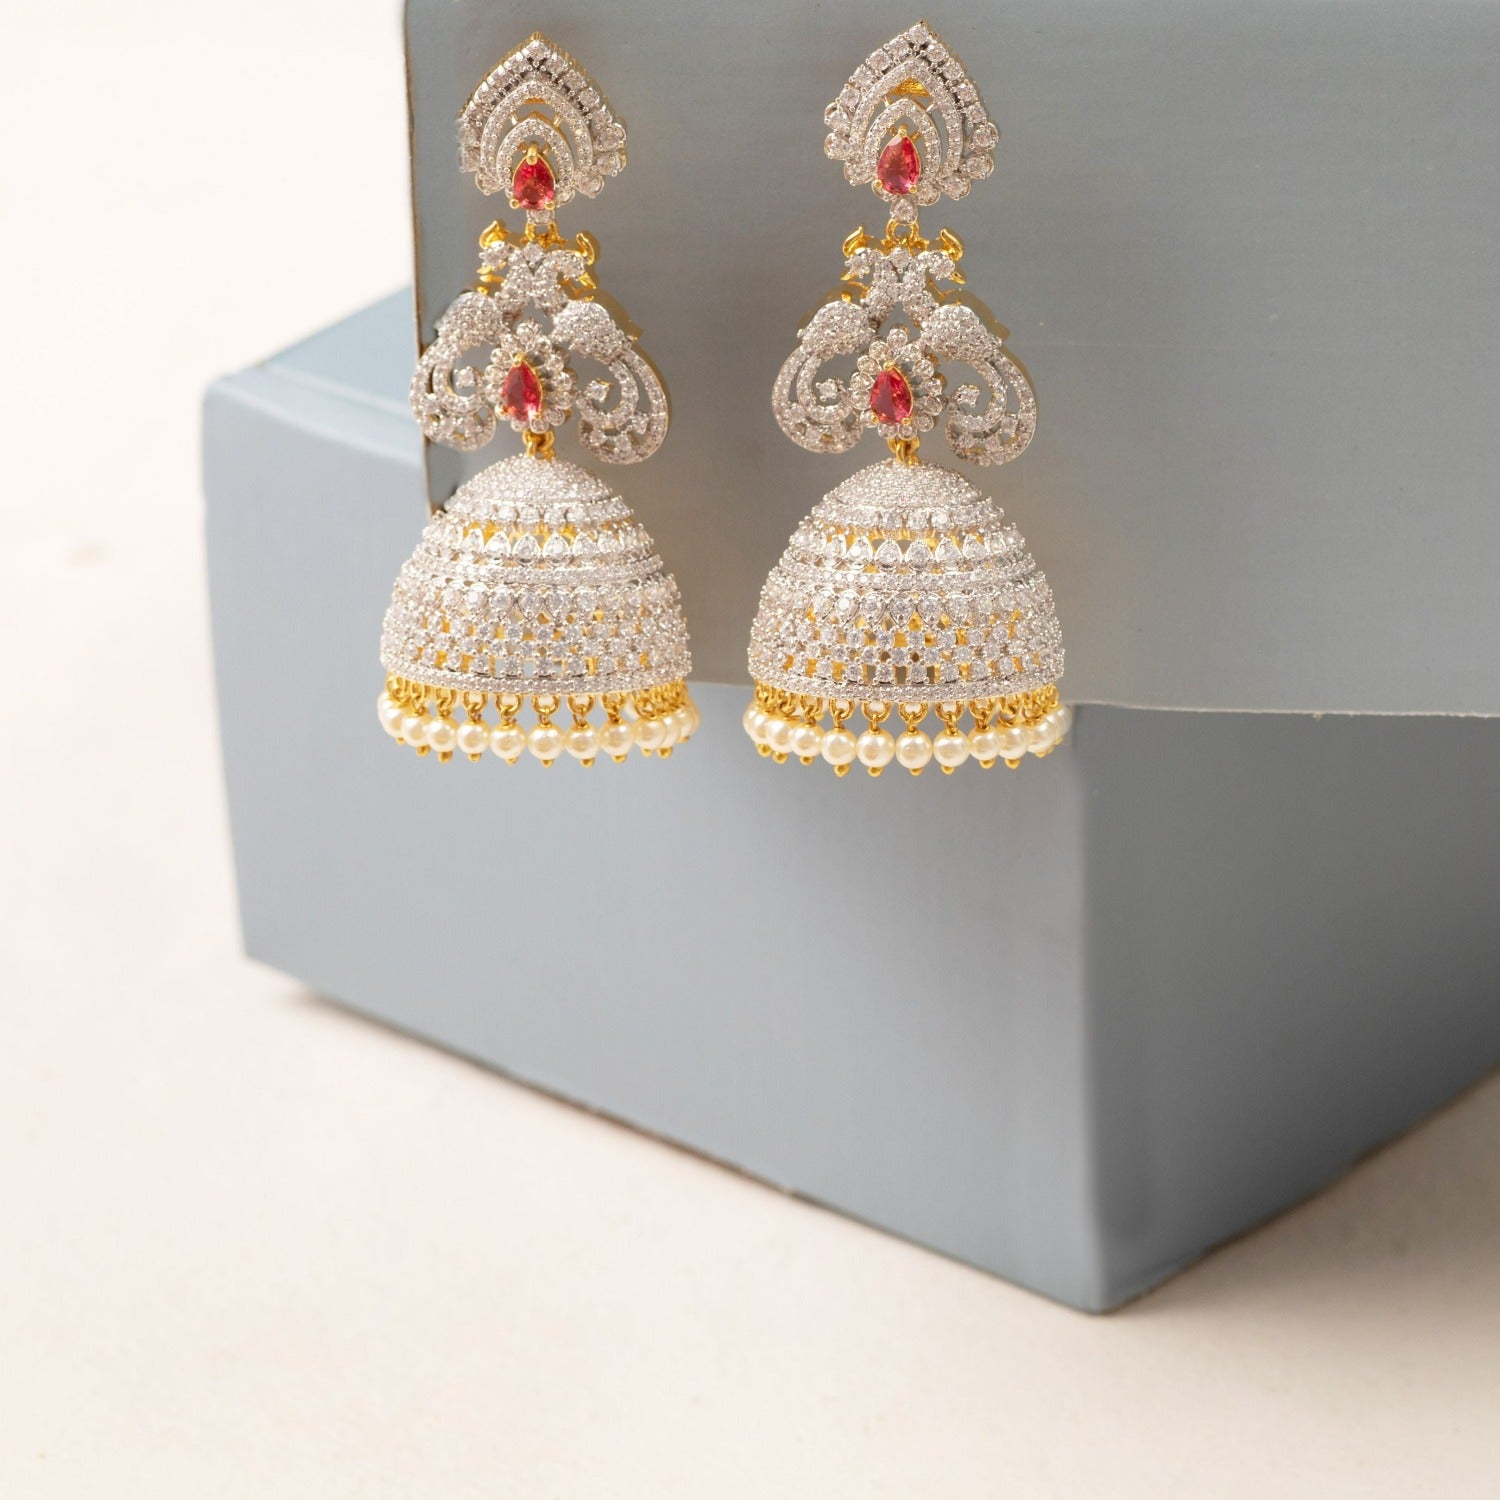 India Gold Silver Exquisite Stud Jhumka Indian Earrings Jewelry For Girls  Women